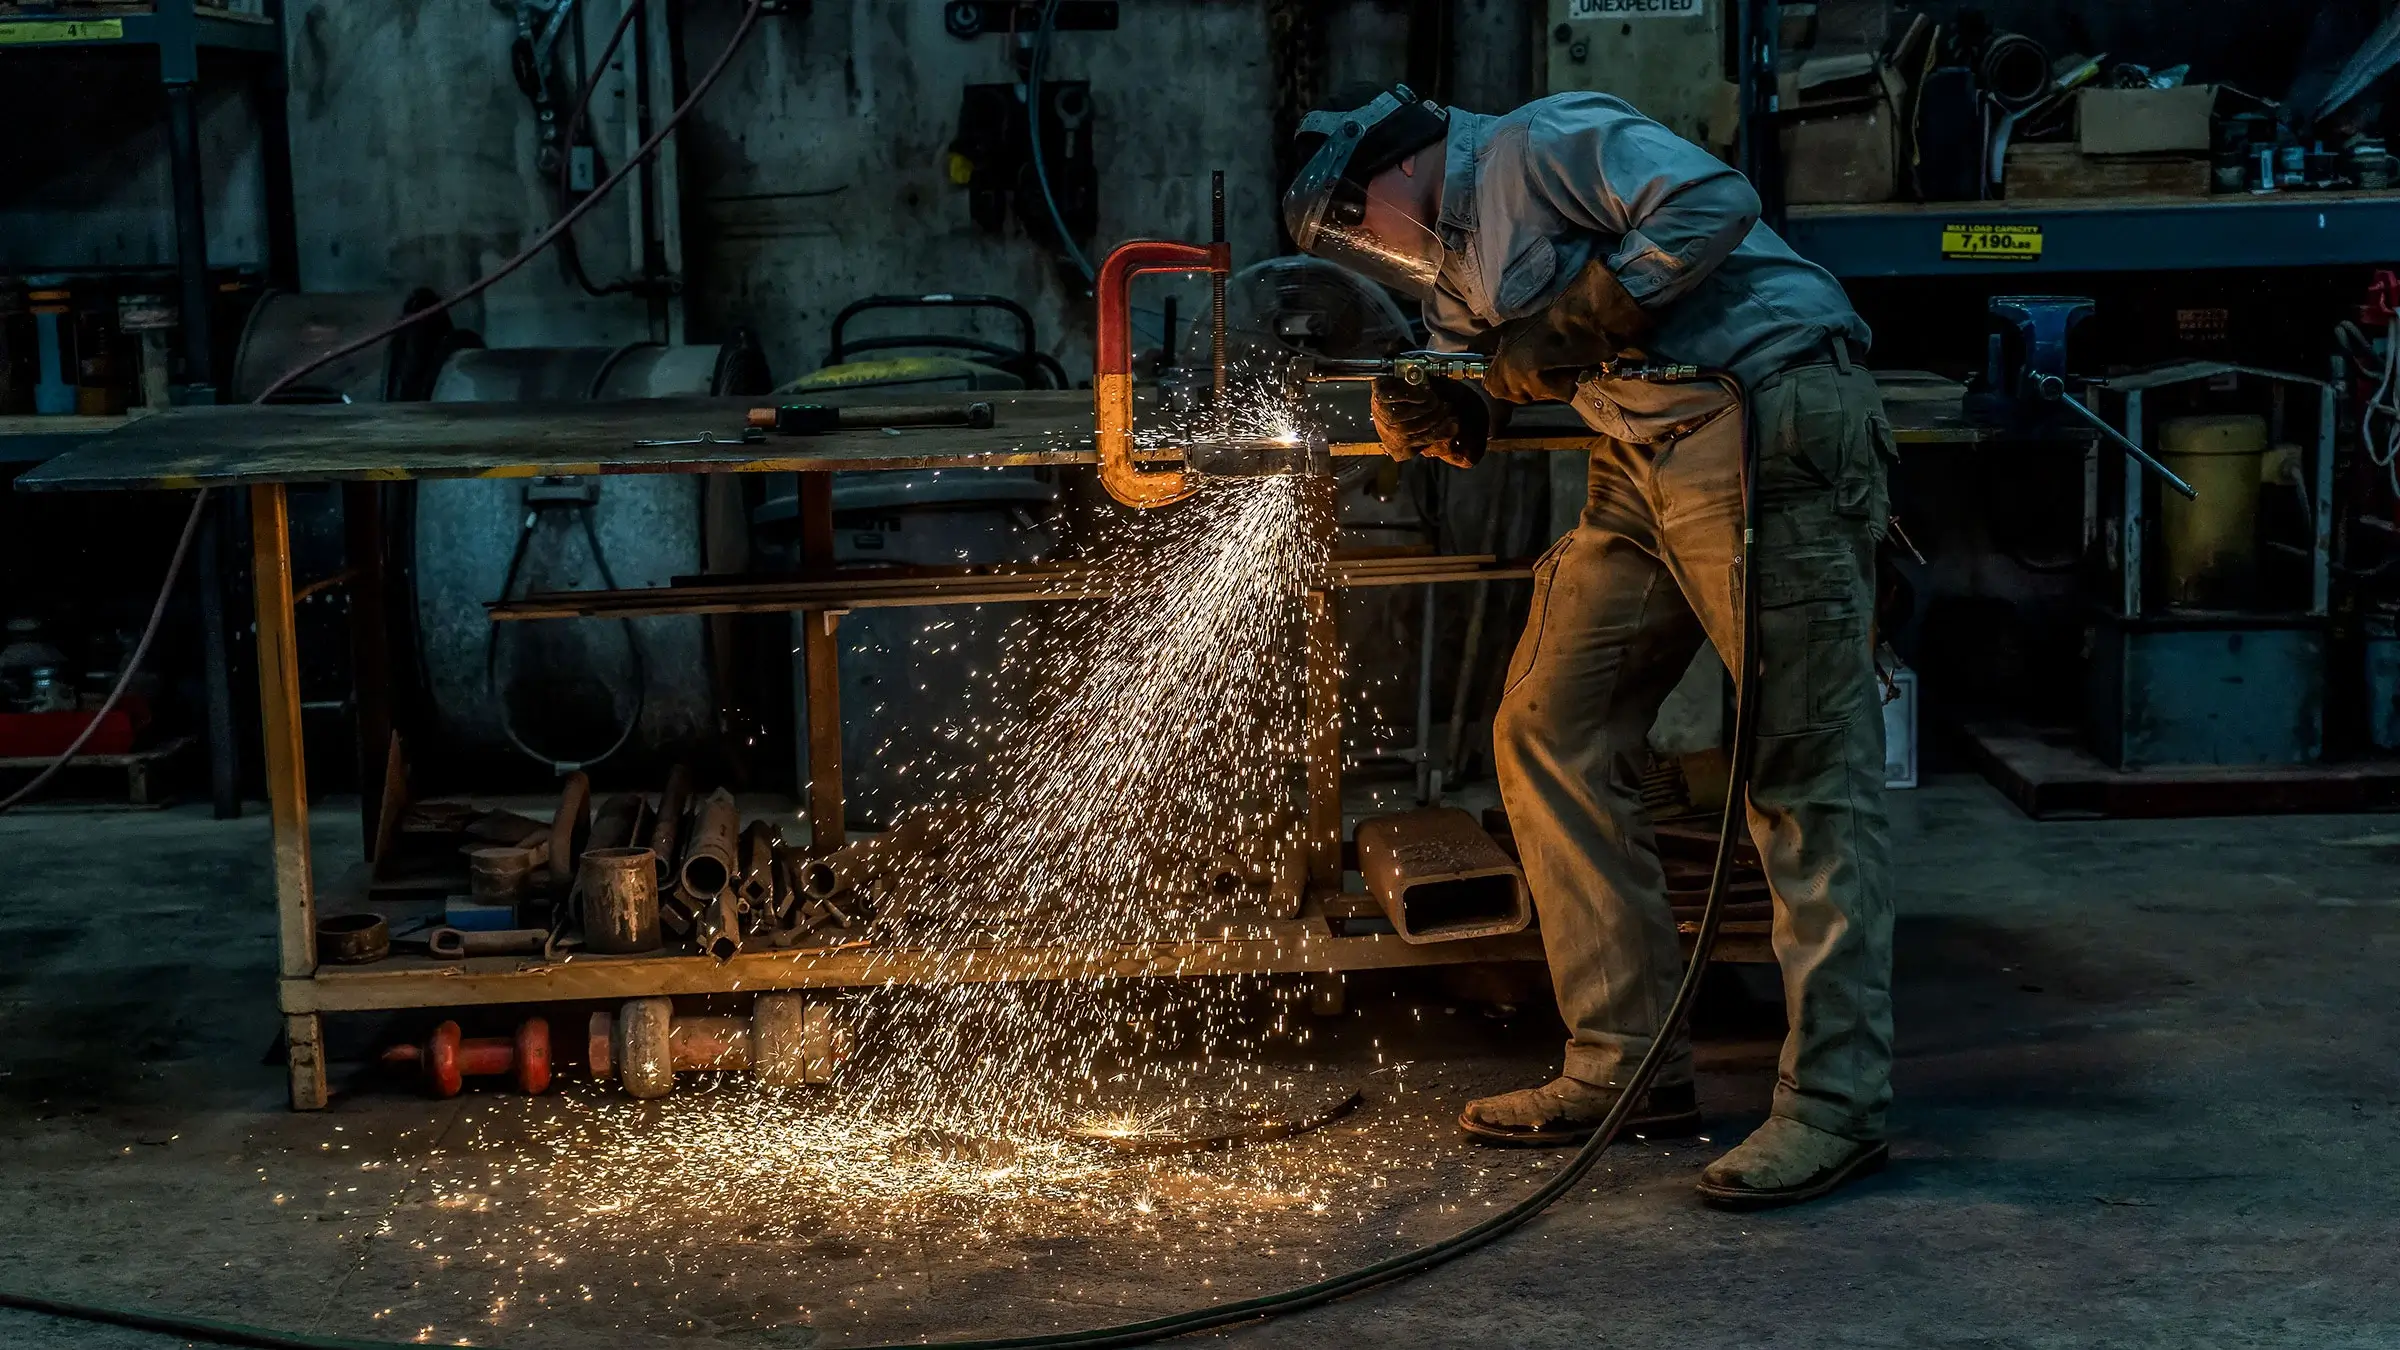 A welder produces a large amount of sparks as he welds a piece of metal at a work bench